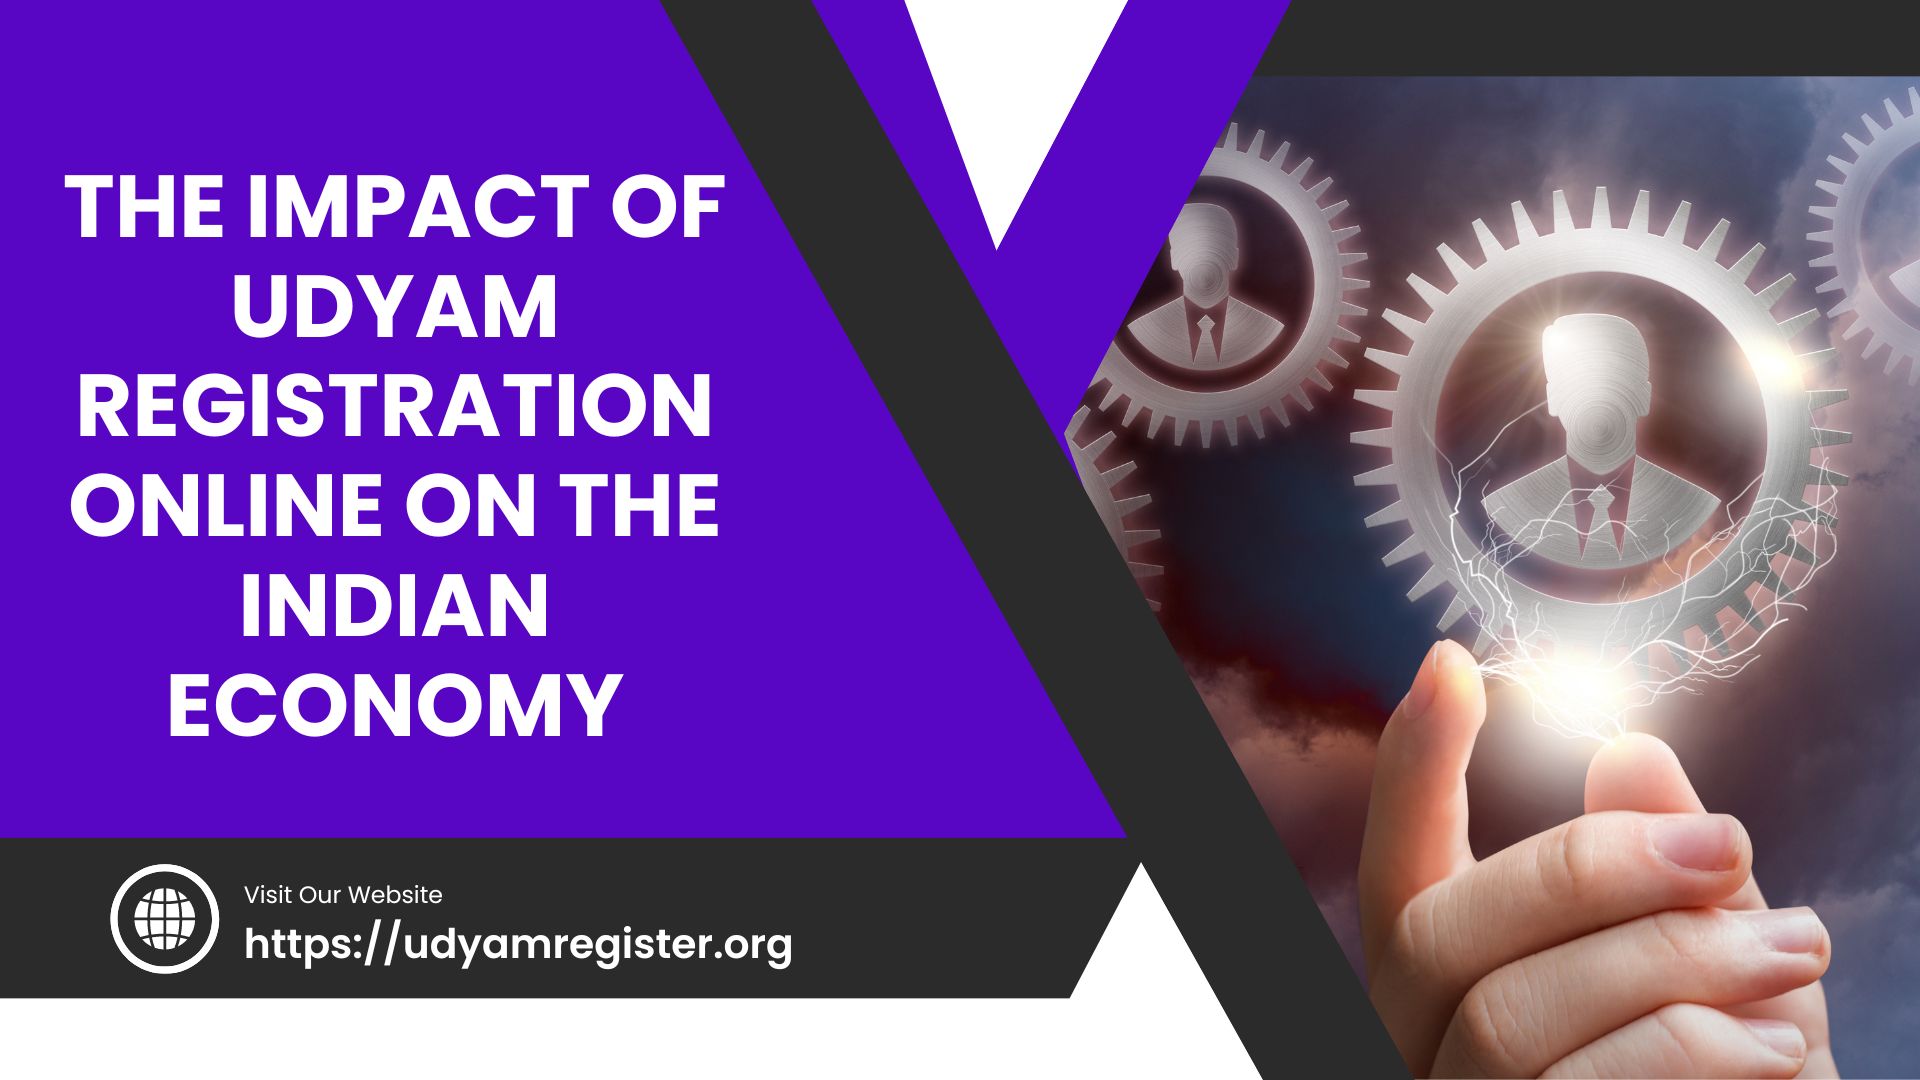 The Impact of Udyam Registration Online on the Indian Economy